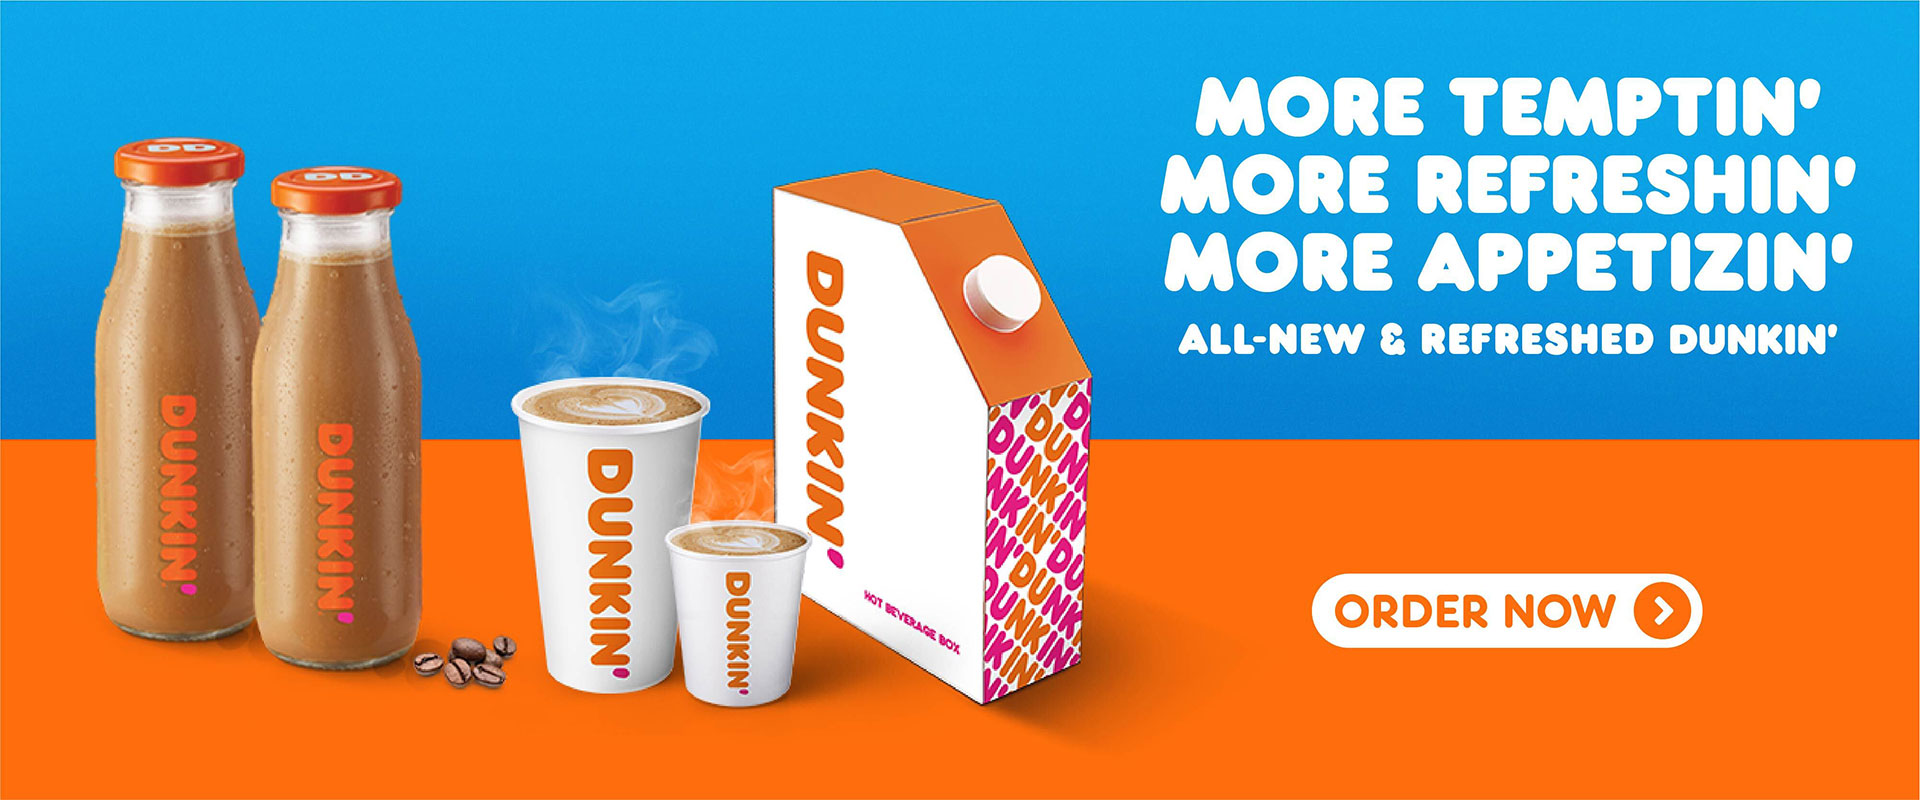 Buy Hot & Cold Beverages From Dunkin Donuts